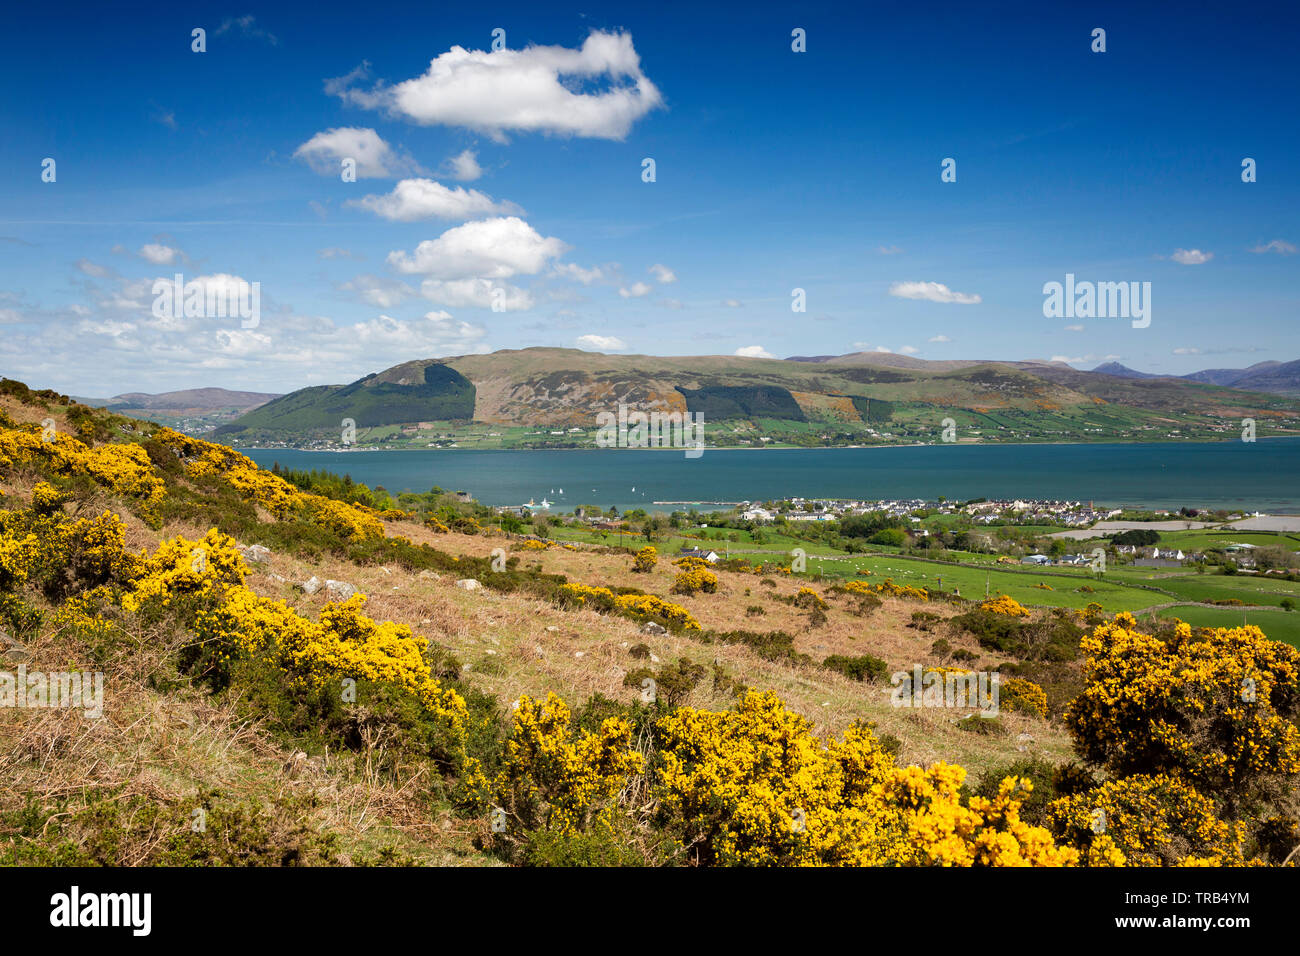 Ireland, Co Louth, Cooley Peninsula, Rooskey, elevated view across Carlingford Lough to Mourne Mountains Stock Photo